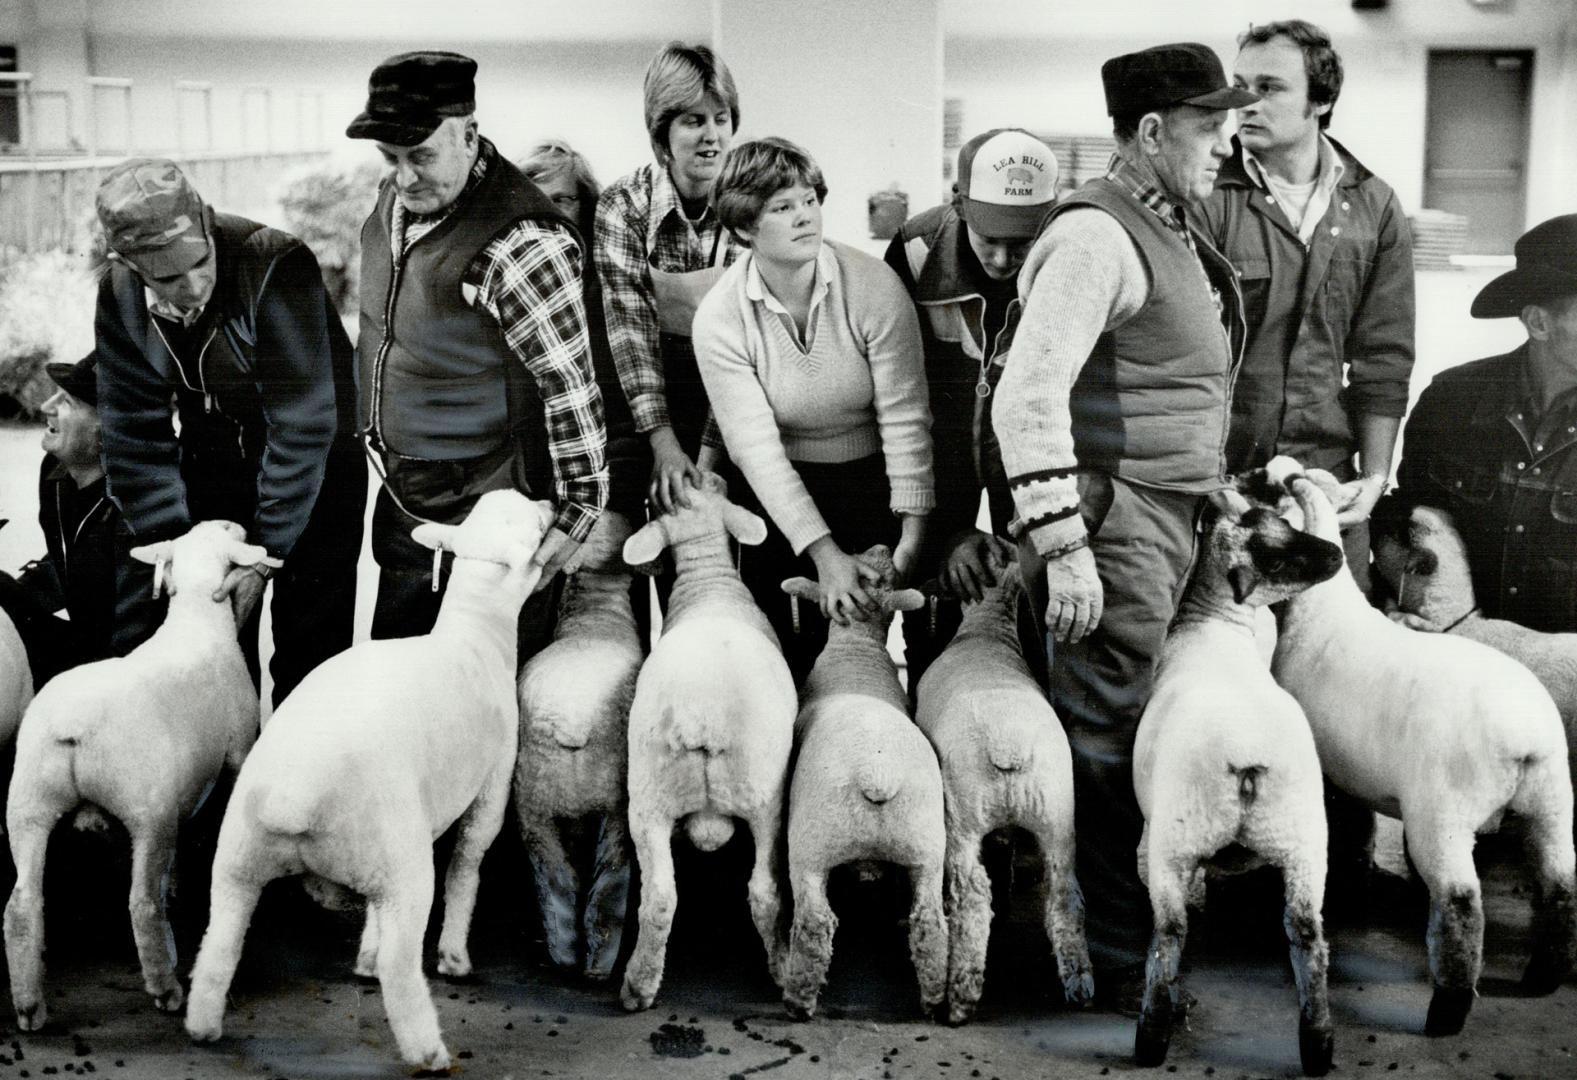 Baa, humbug! Even Royal Winter Fair-calibre lambs behave like a bunch of sheep: All of them seem to be camera-shy as their owners line them up for judging